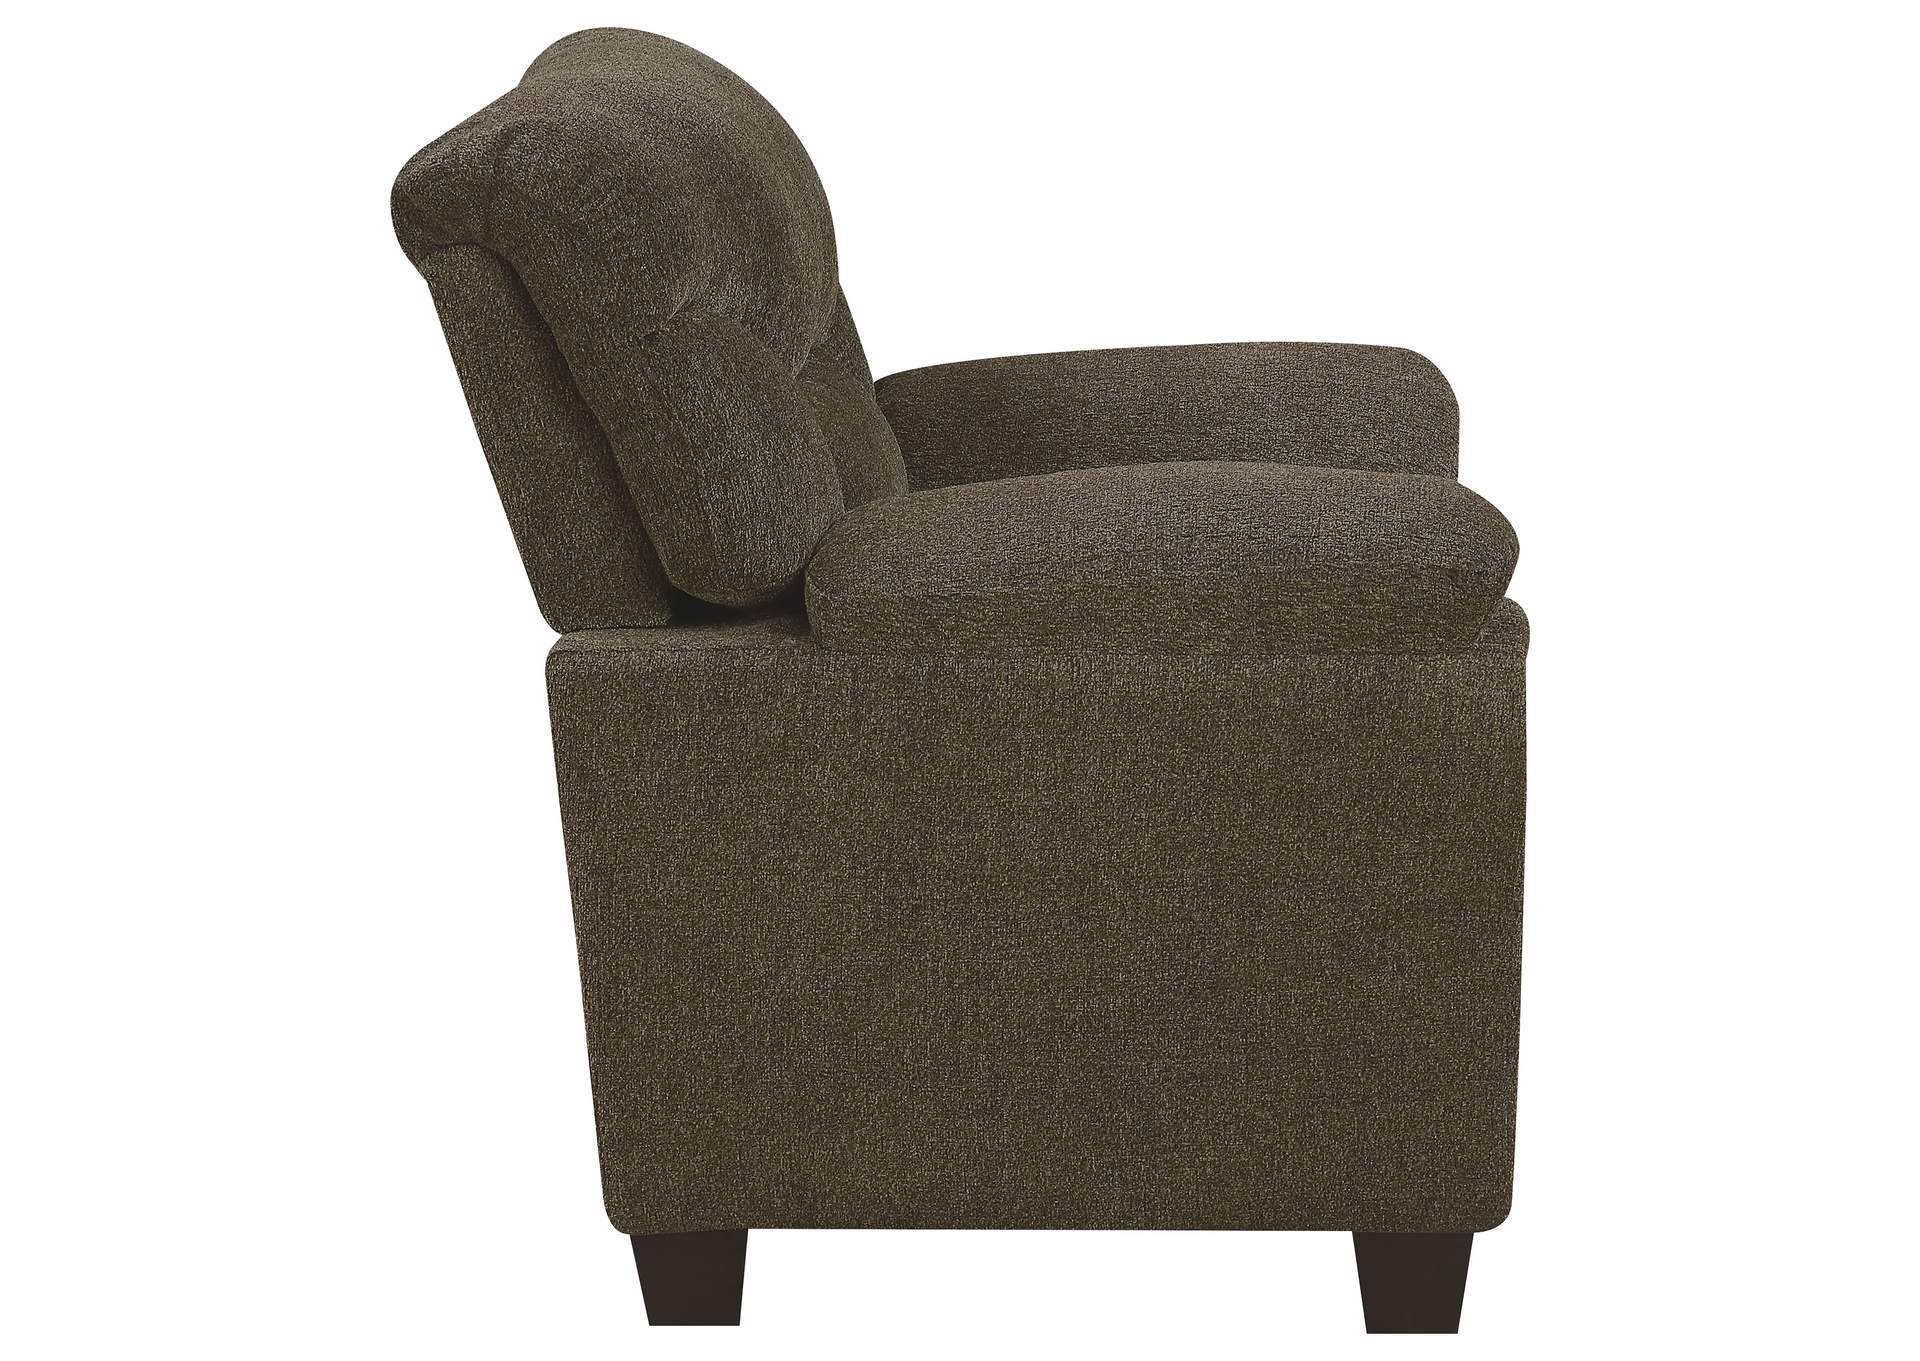 Clementine Upholstered Chair with Nailhead Trim Brown,Coaster Furniture